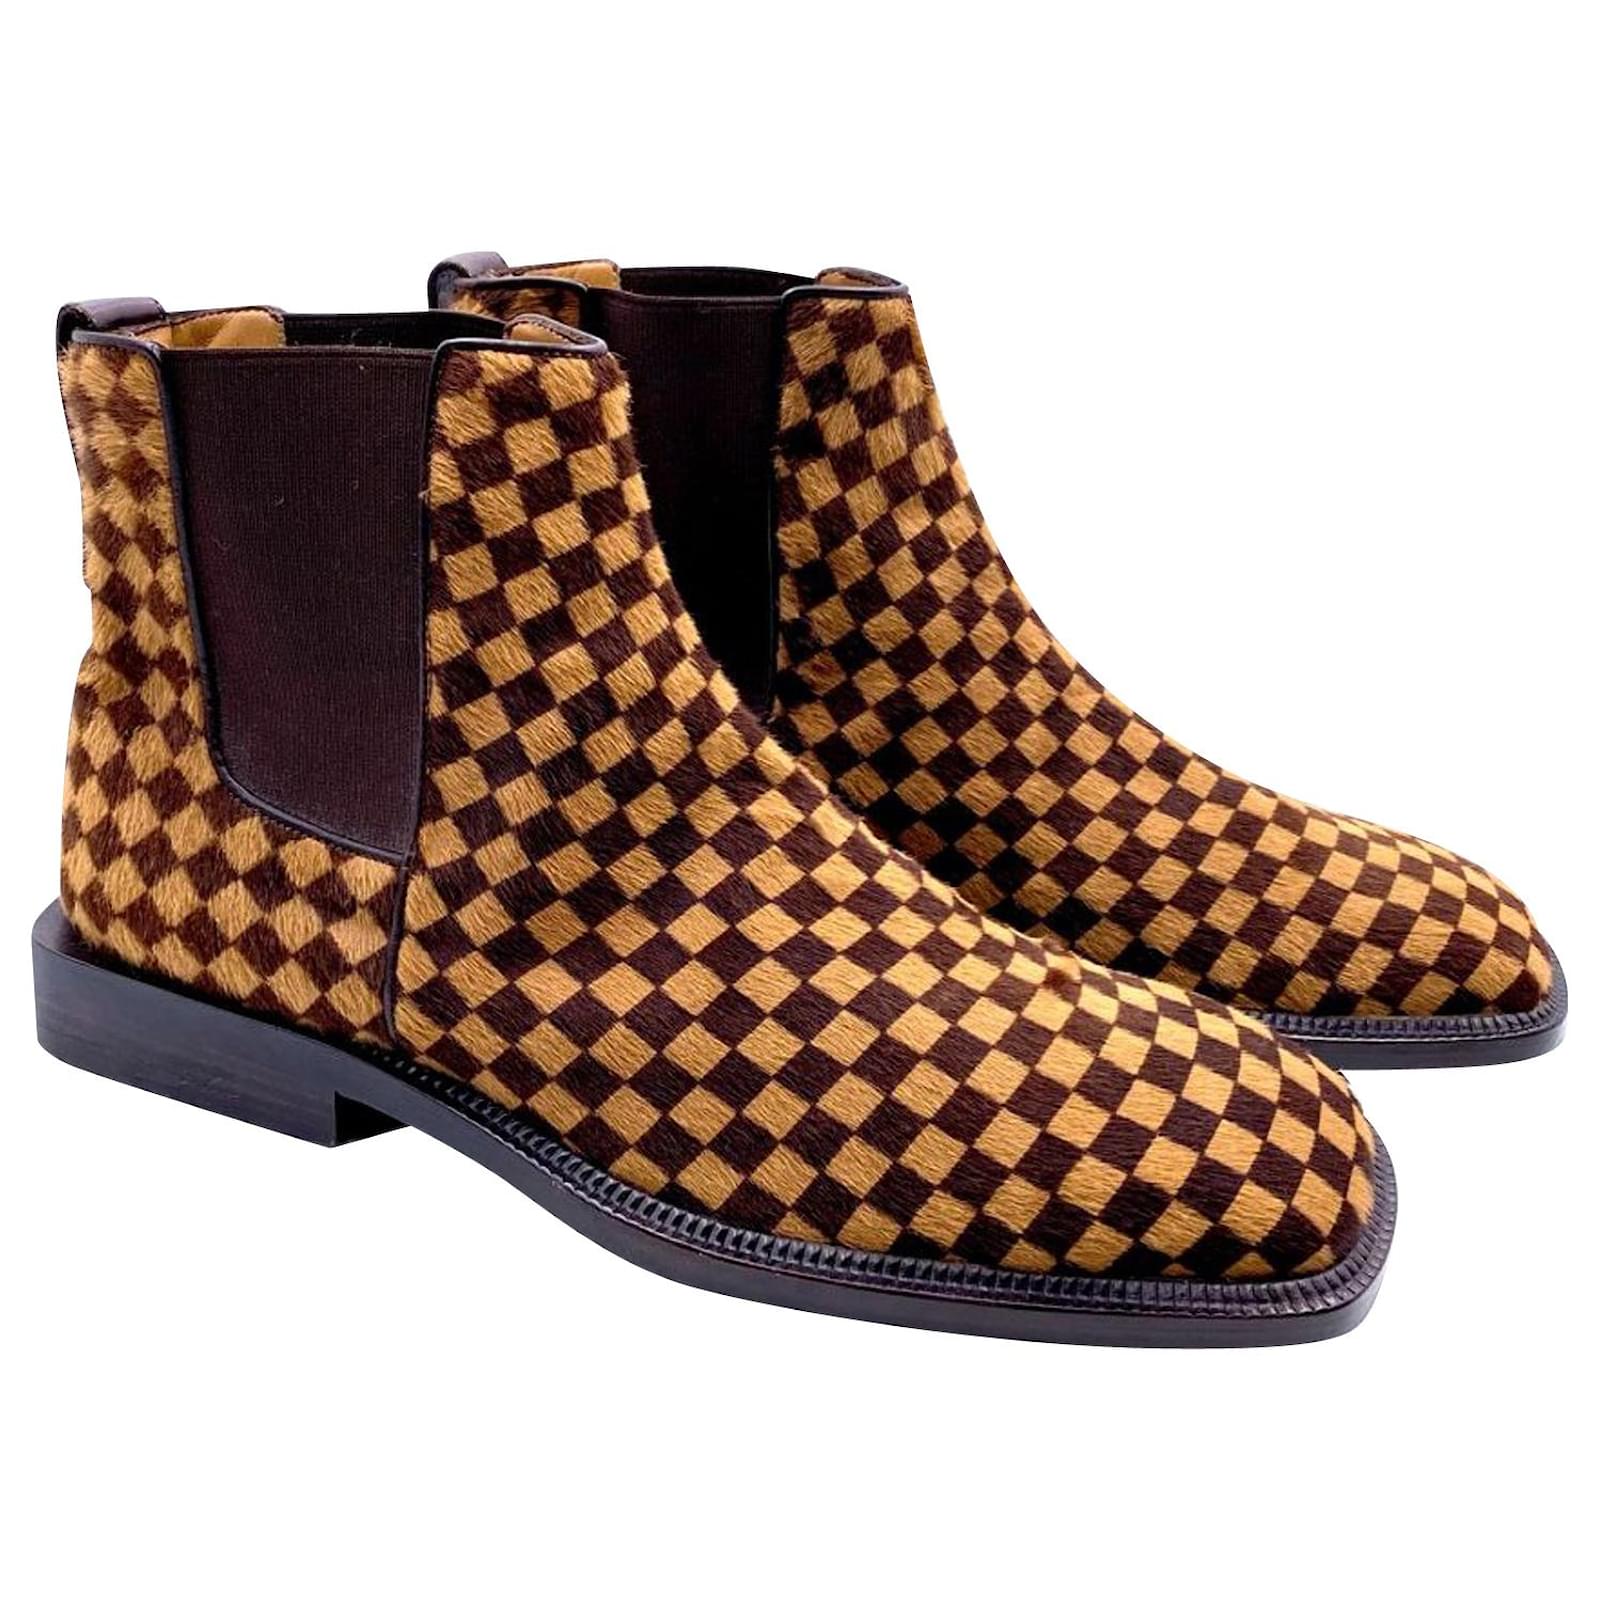 Louis Vuitton boots in damier ebene calf-hair Brown Leather ref